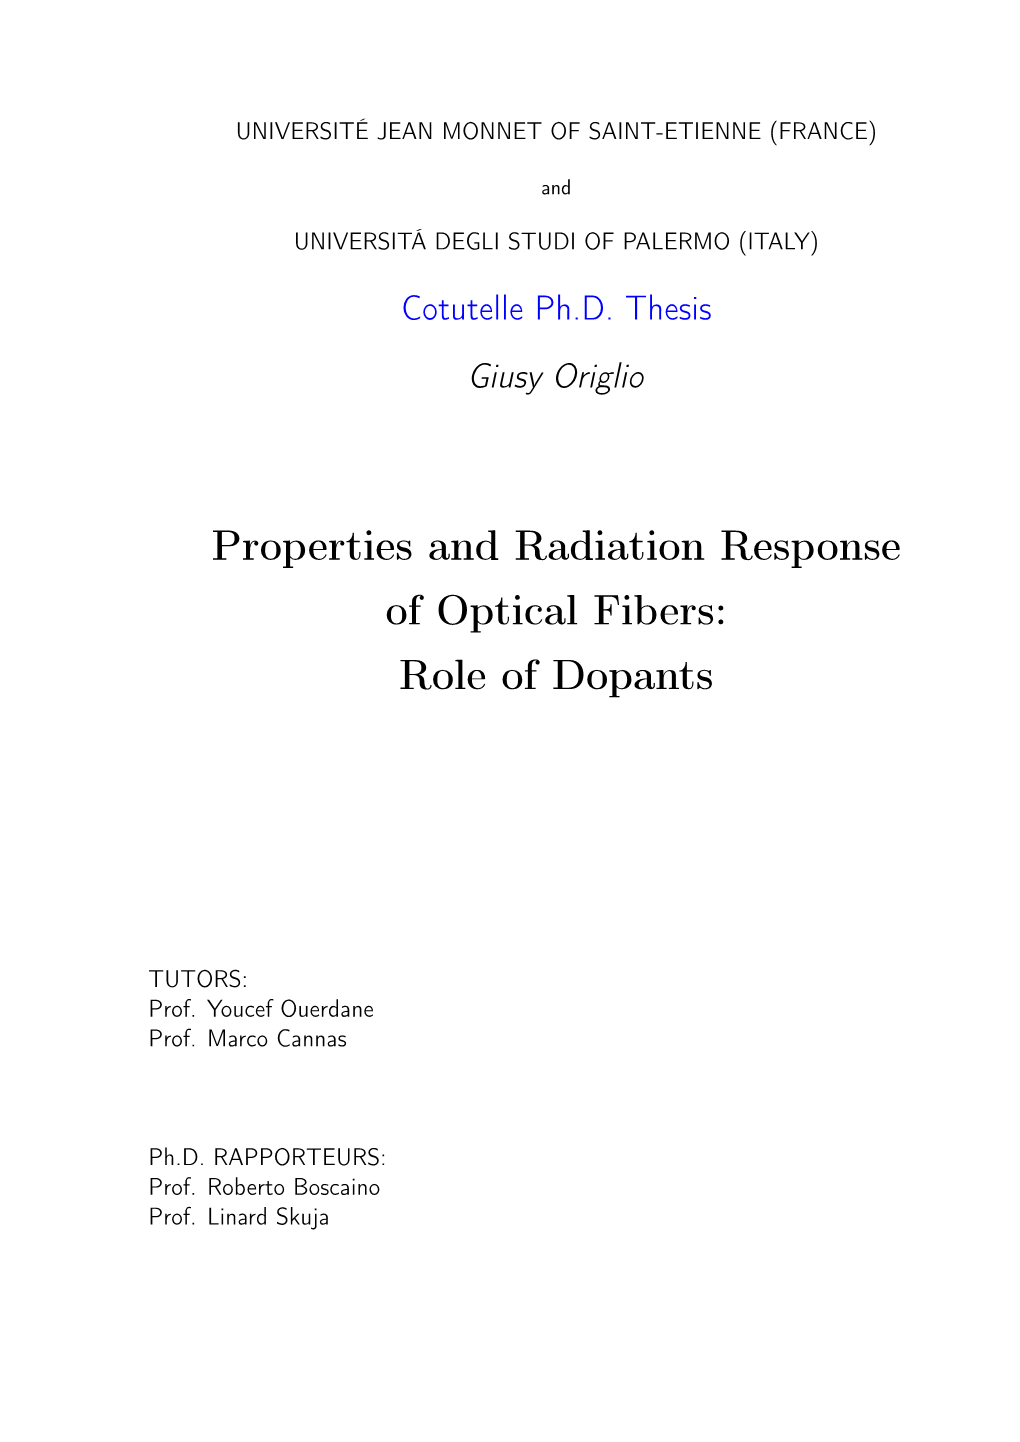 Properties and Radiation Response of Optical Fibers: Role of Dopants